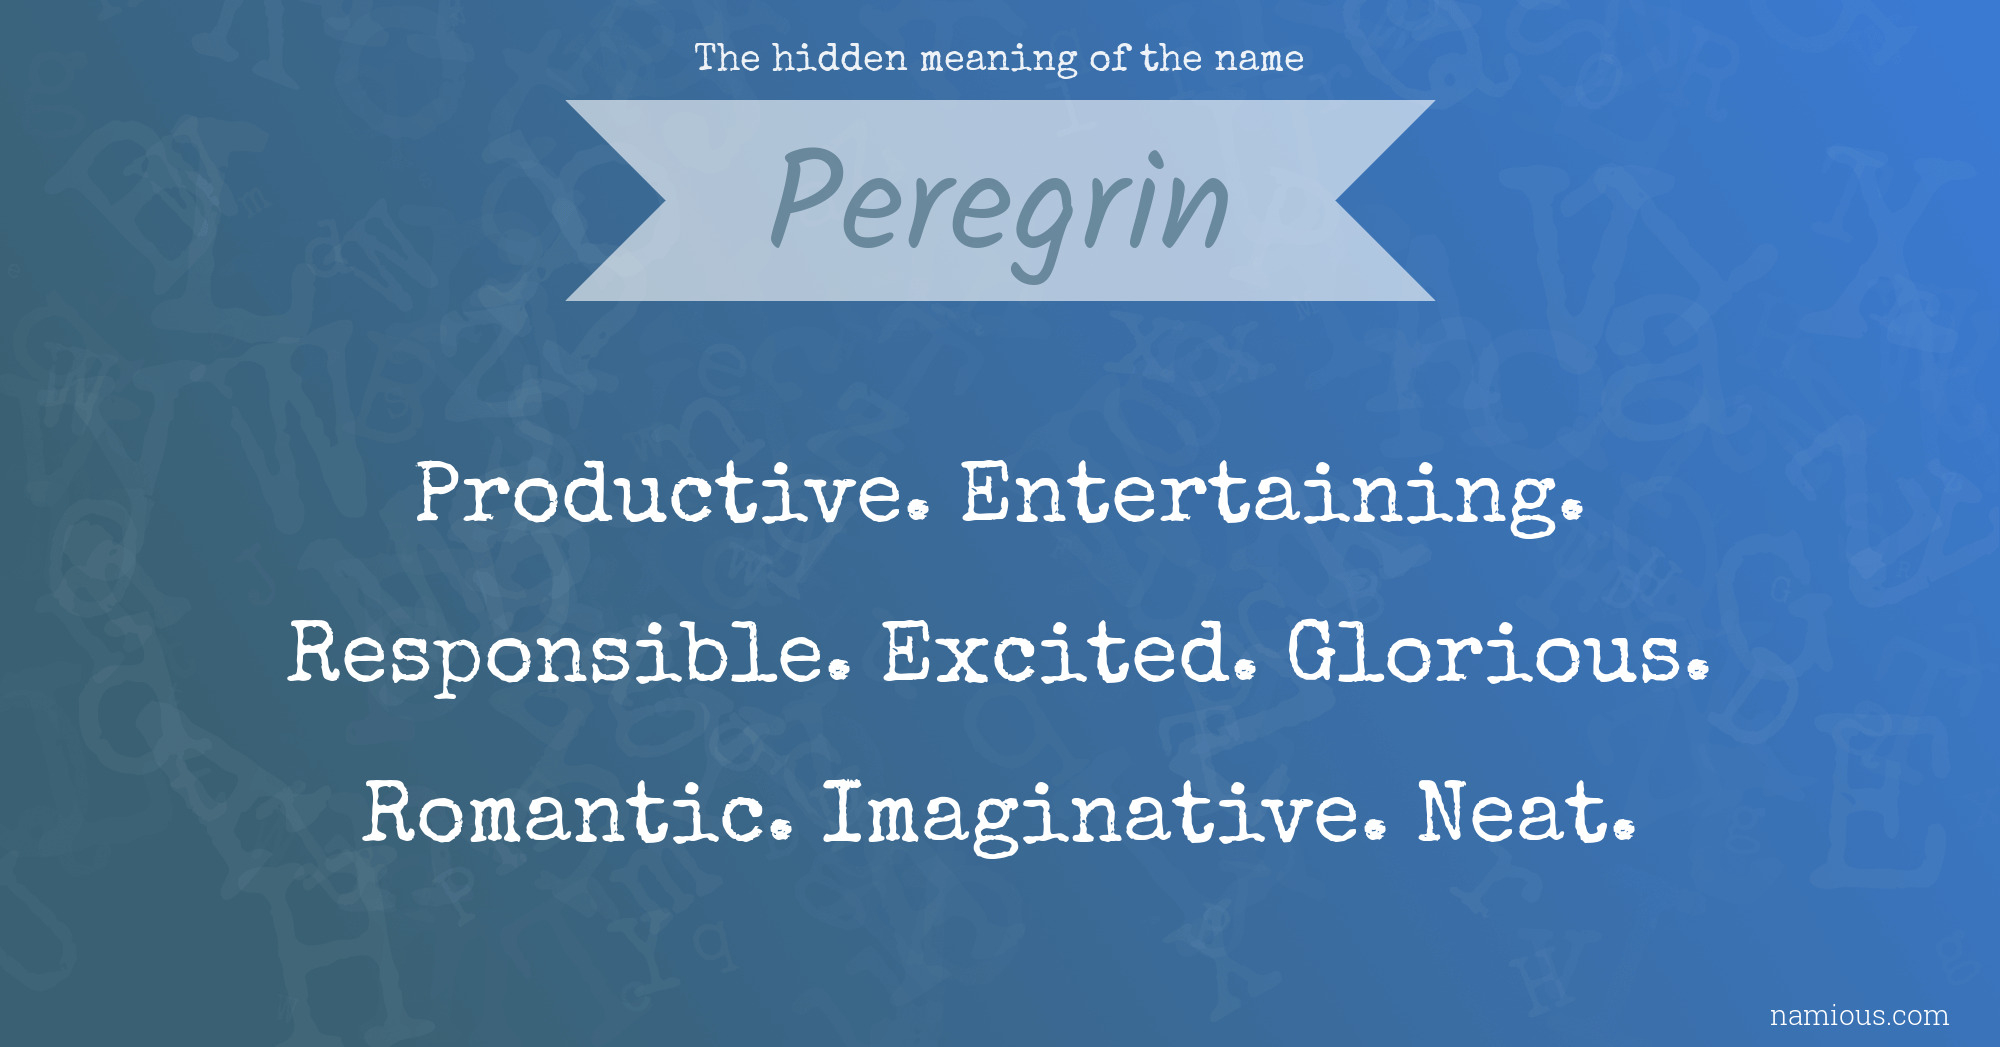 The hidden meaning of the name Peregrin